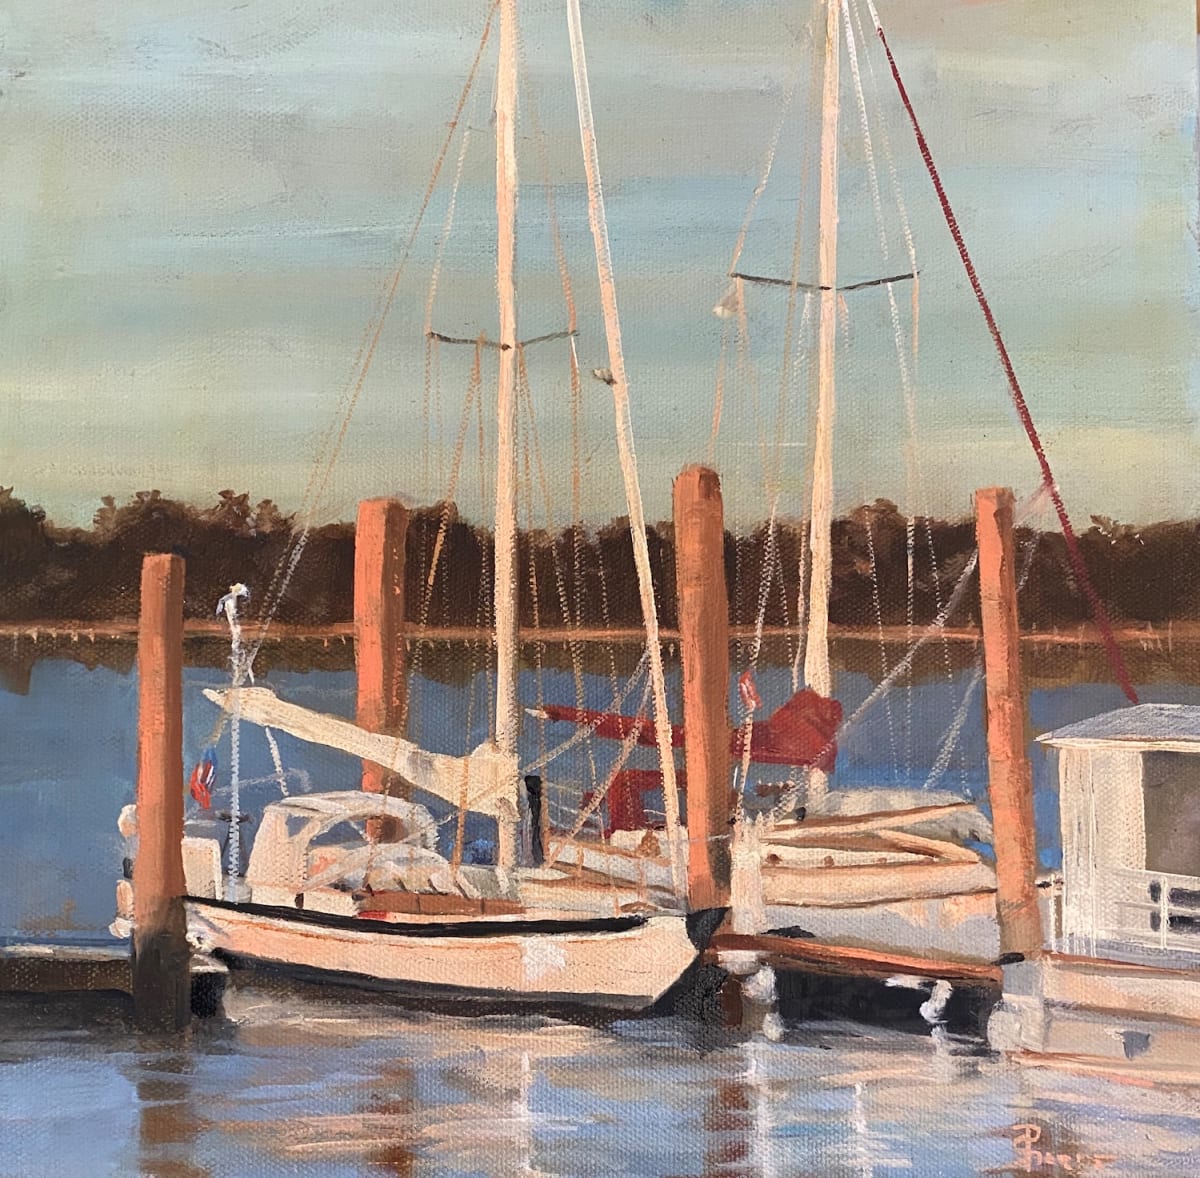 Docked for the Evening by Phyllis Sharpe 